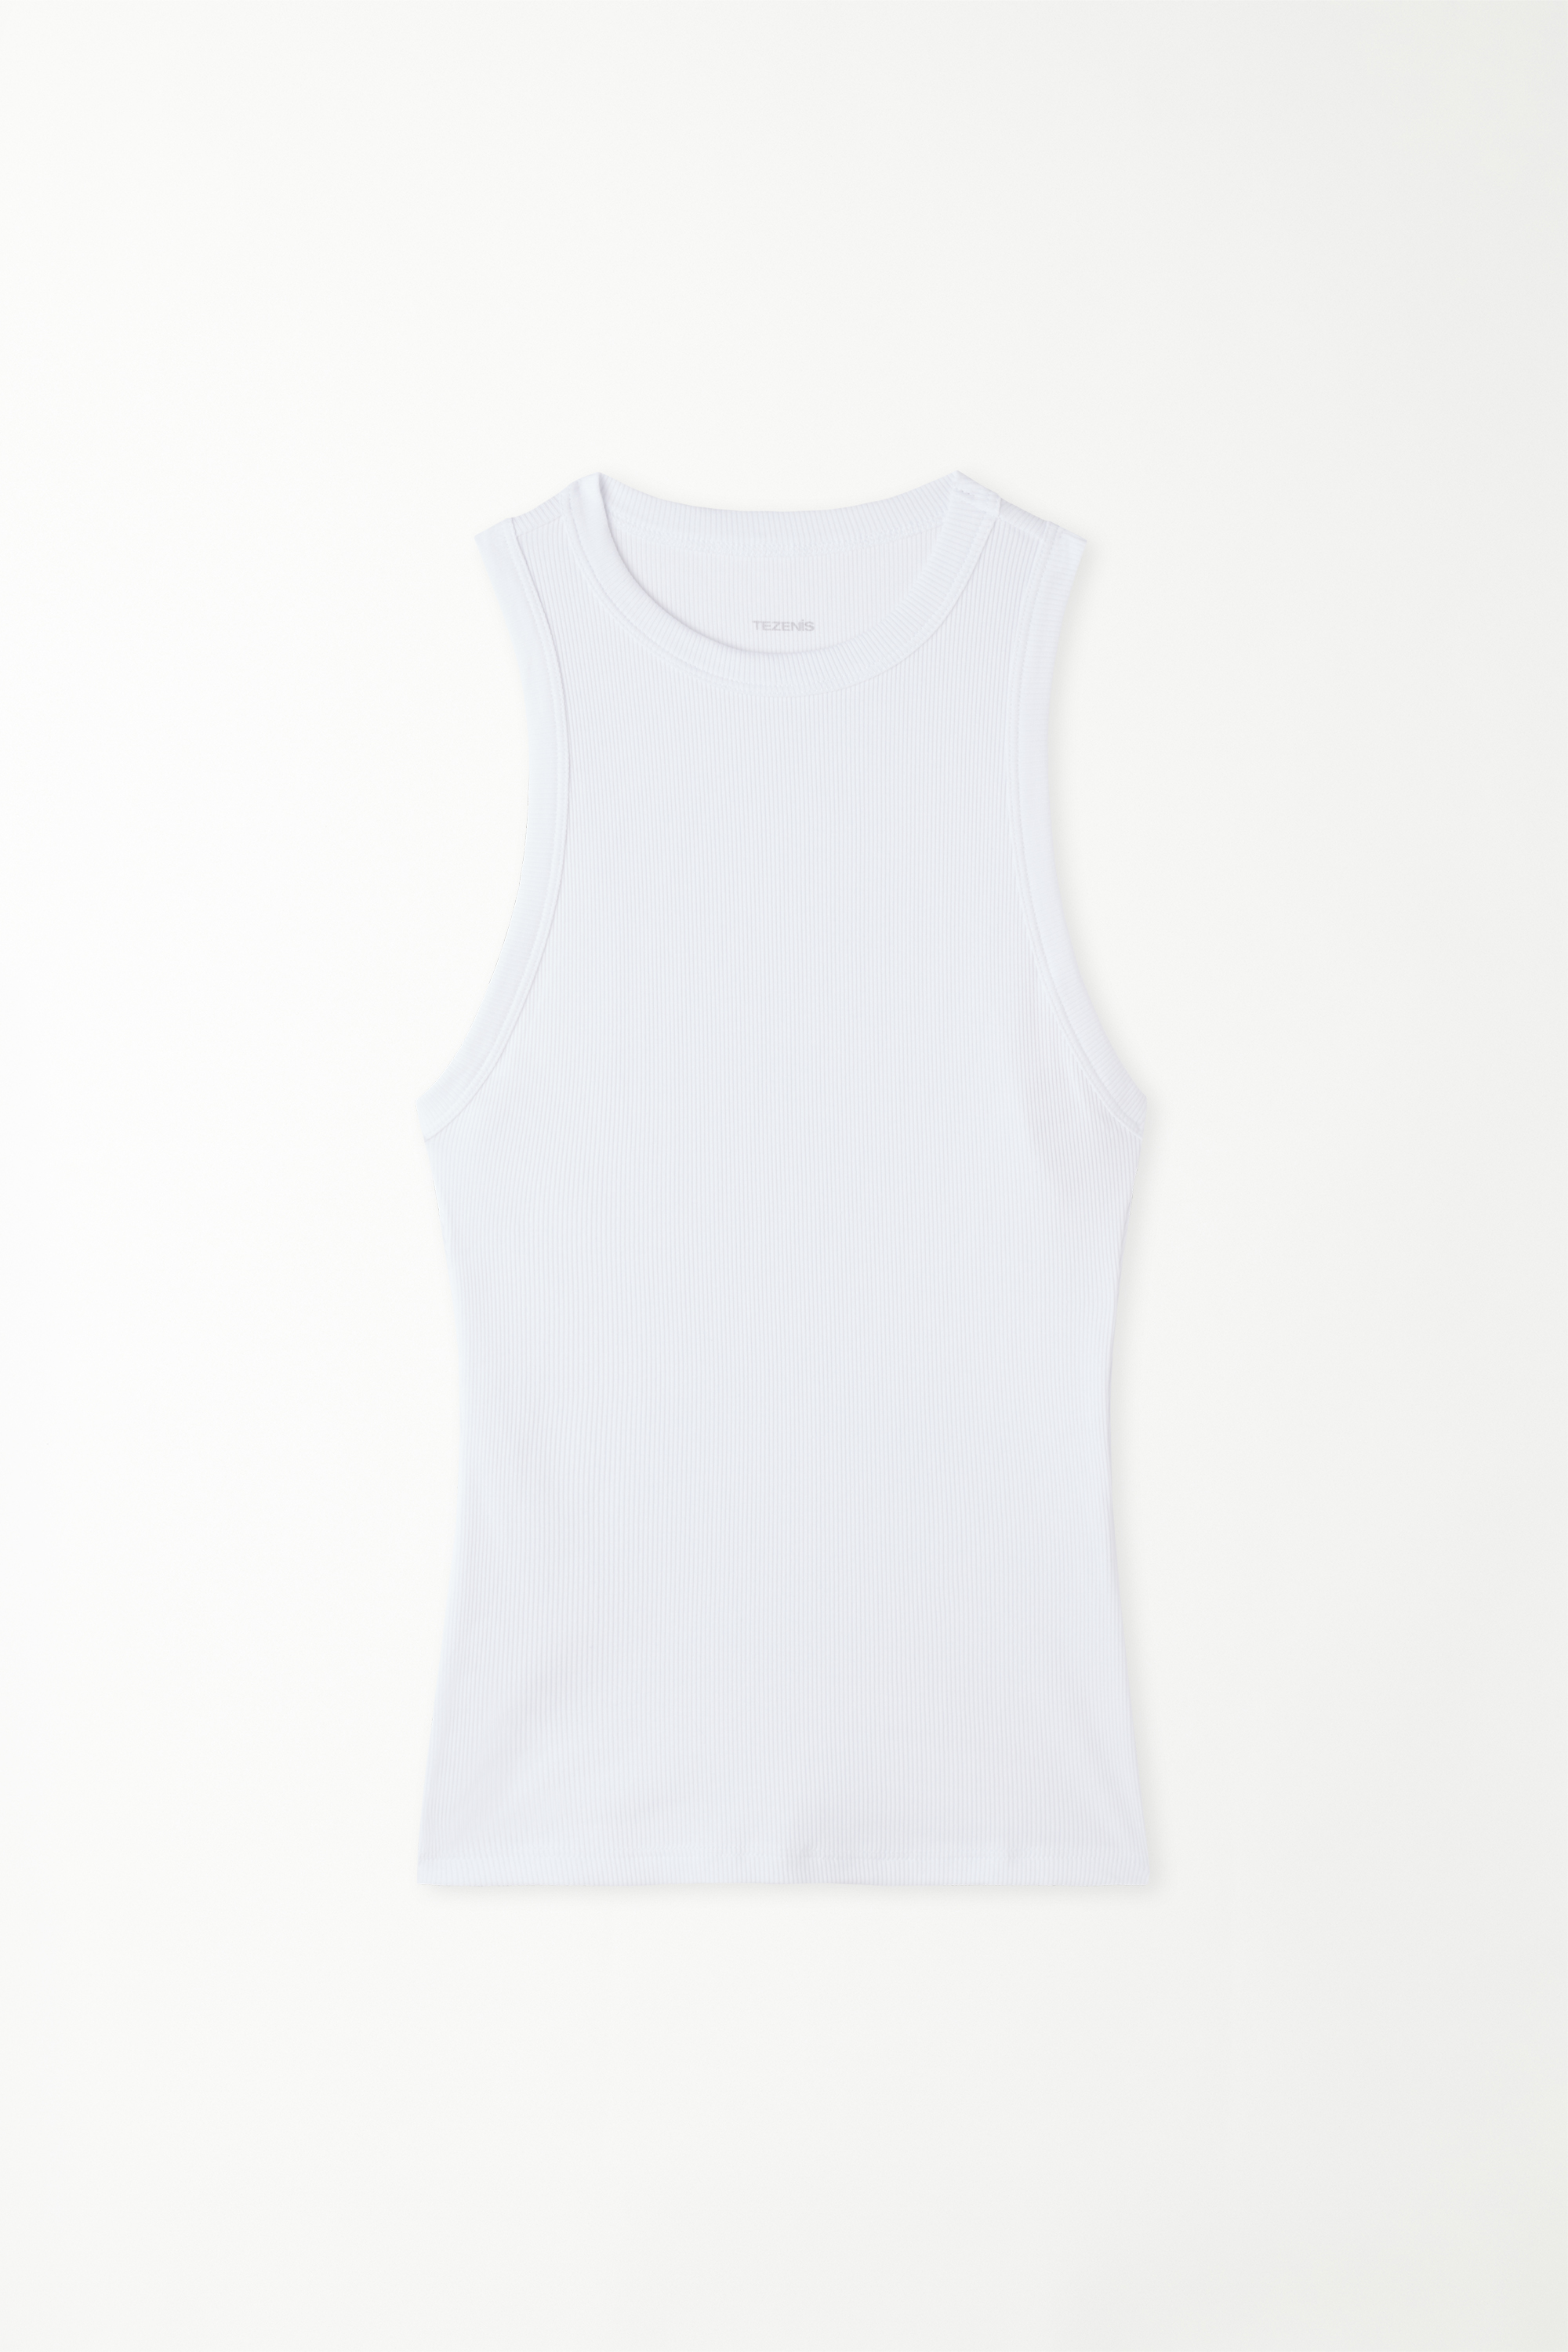 Ribbed Cotton Racer Back Camisole